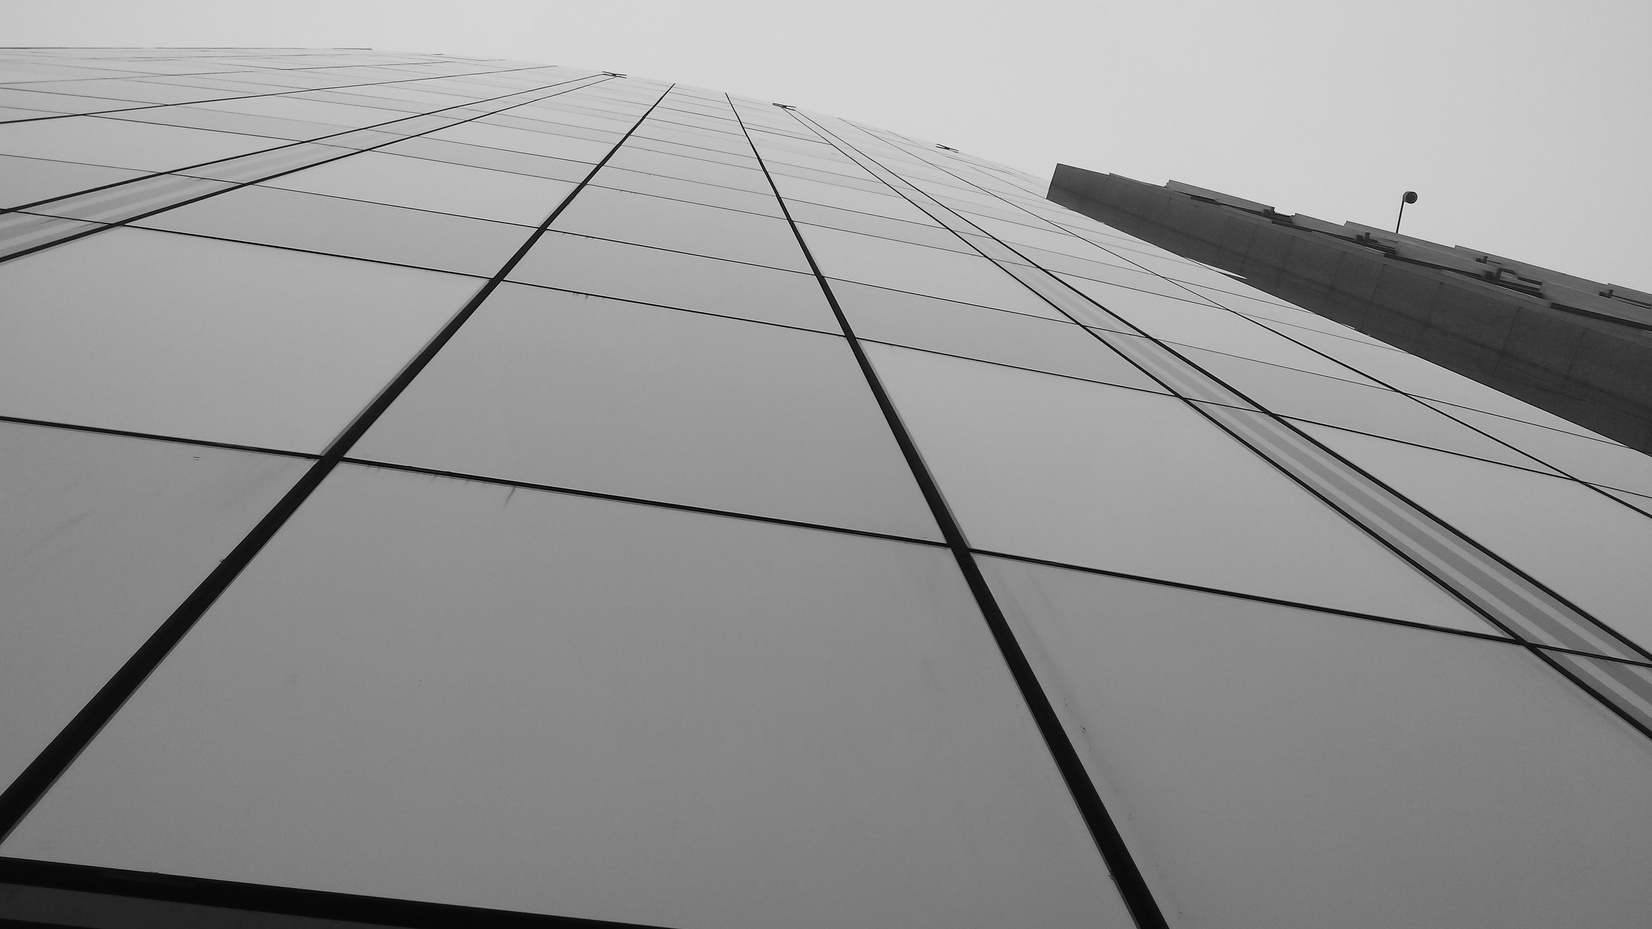 Grayscale Photo of Curtain Wall Building